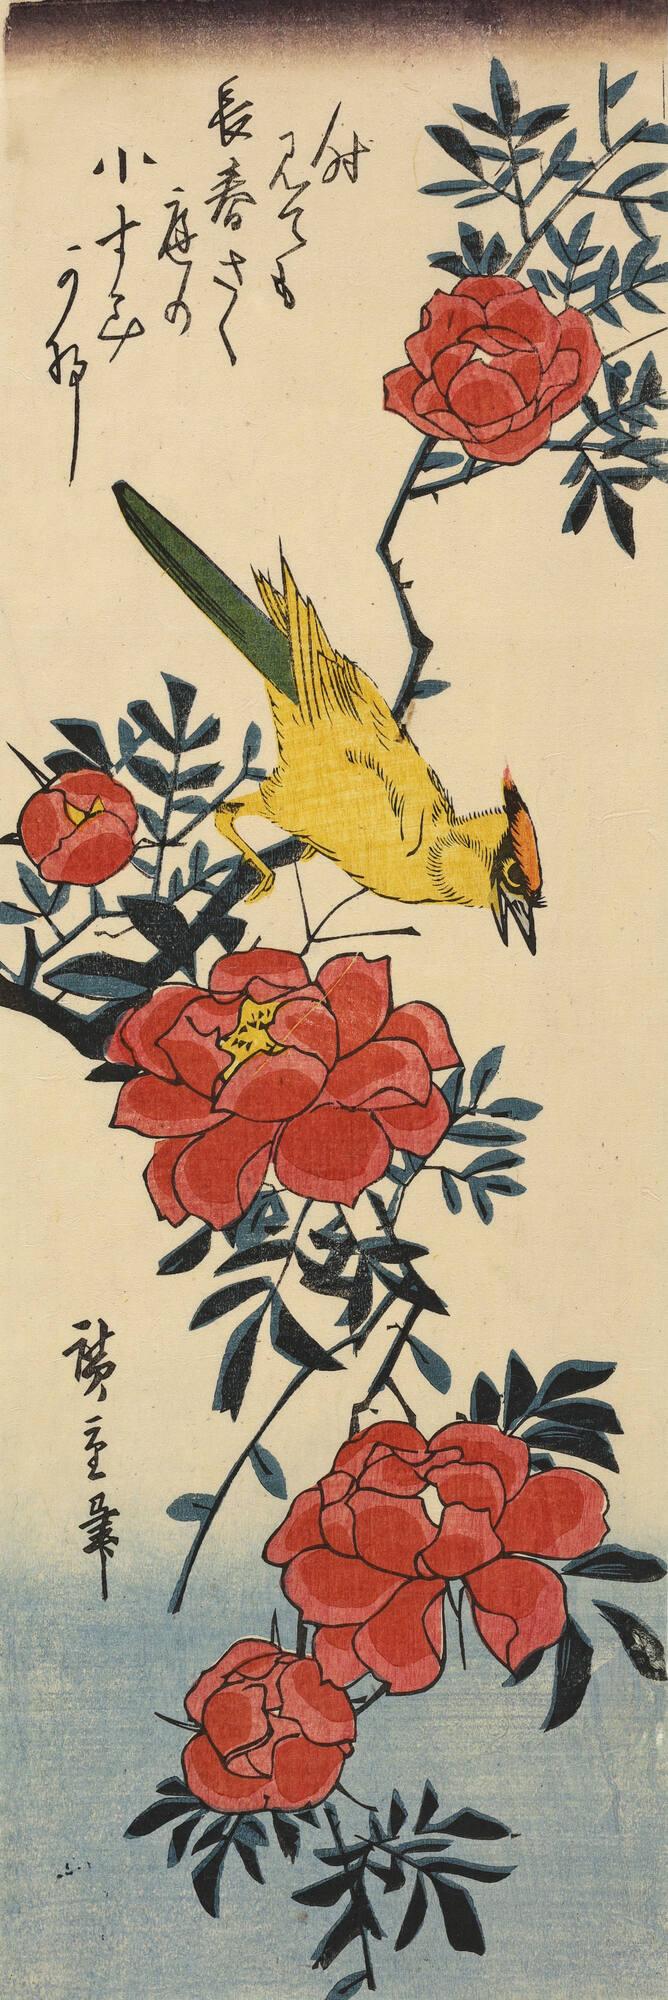 Yellow Bird and Roses